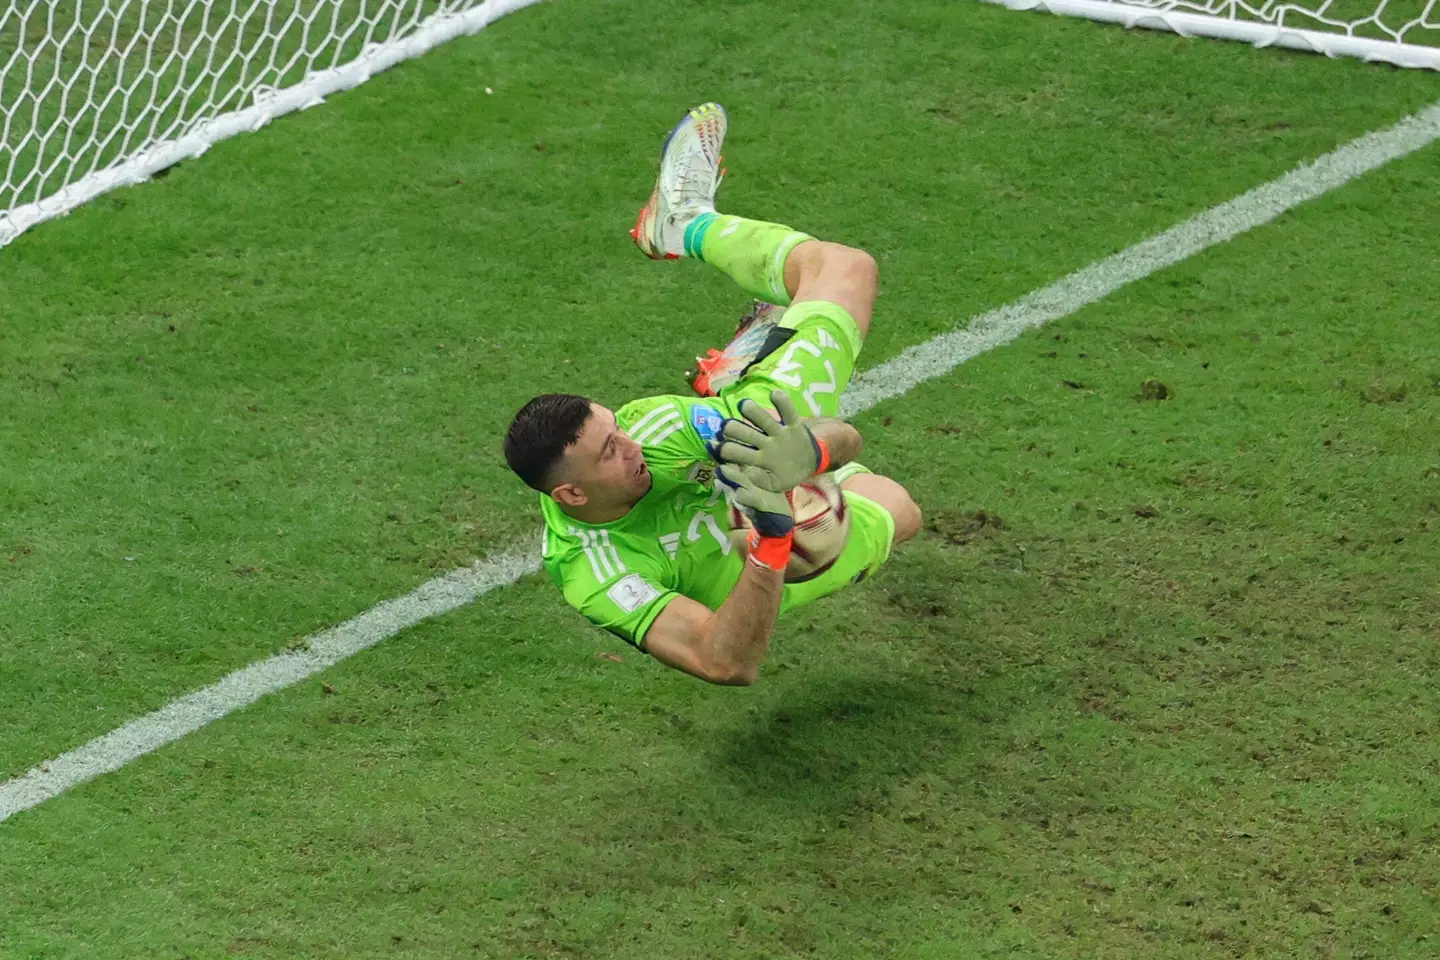 Martinez makes a save in the penalty shootout. (Image